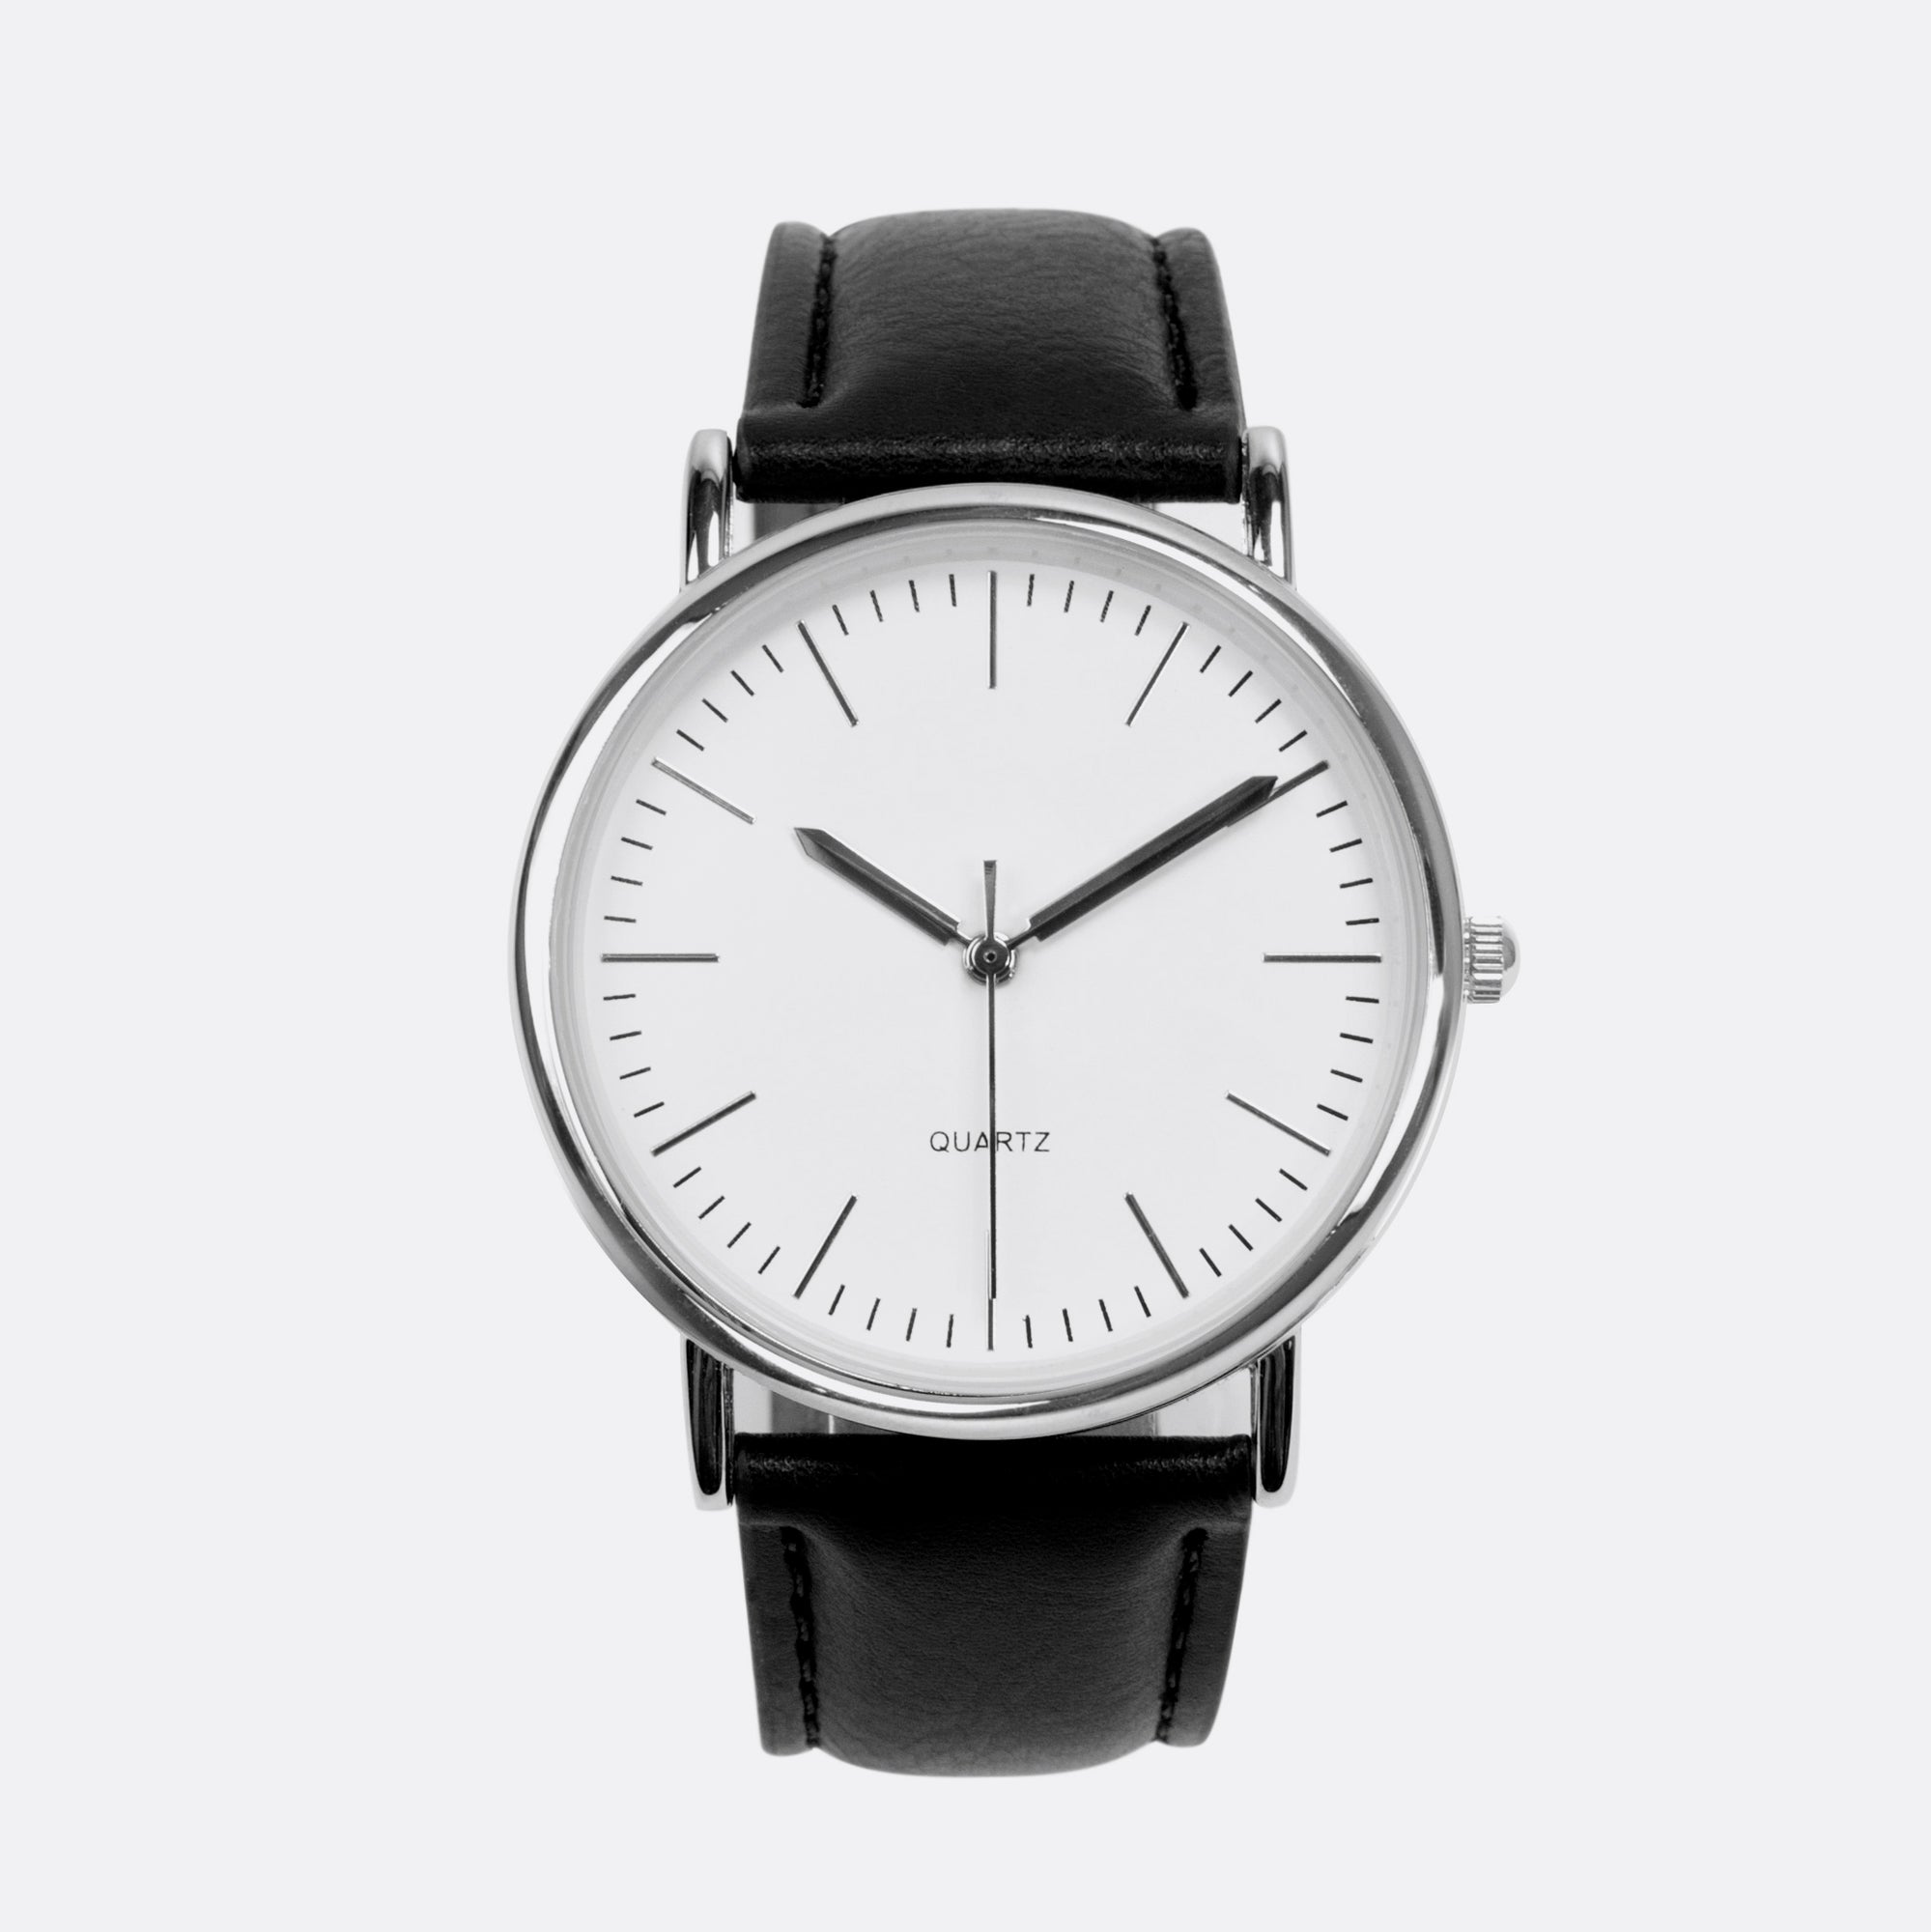 Silvered watch with leatherette bracelet and round dial